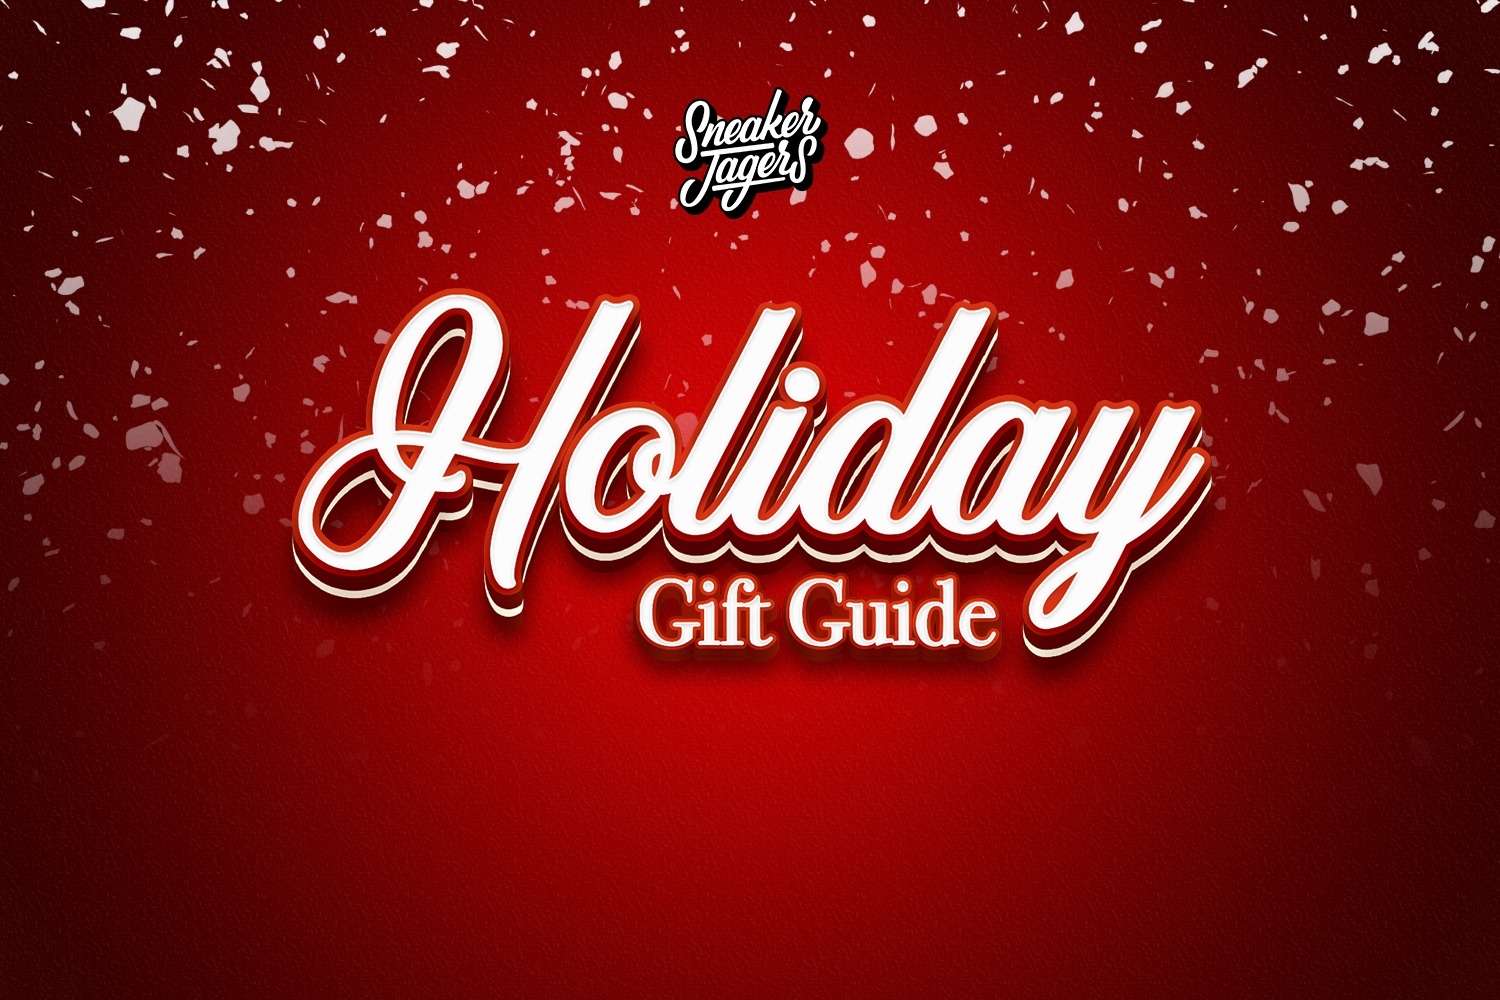 The Holiday Gift Guide from FotomagazinShops